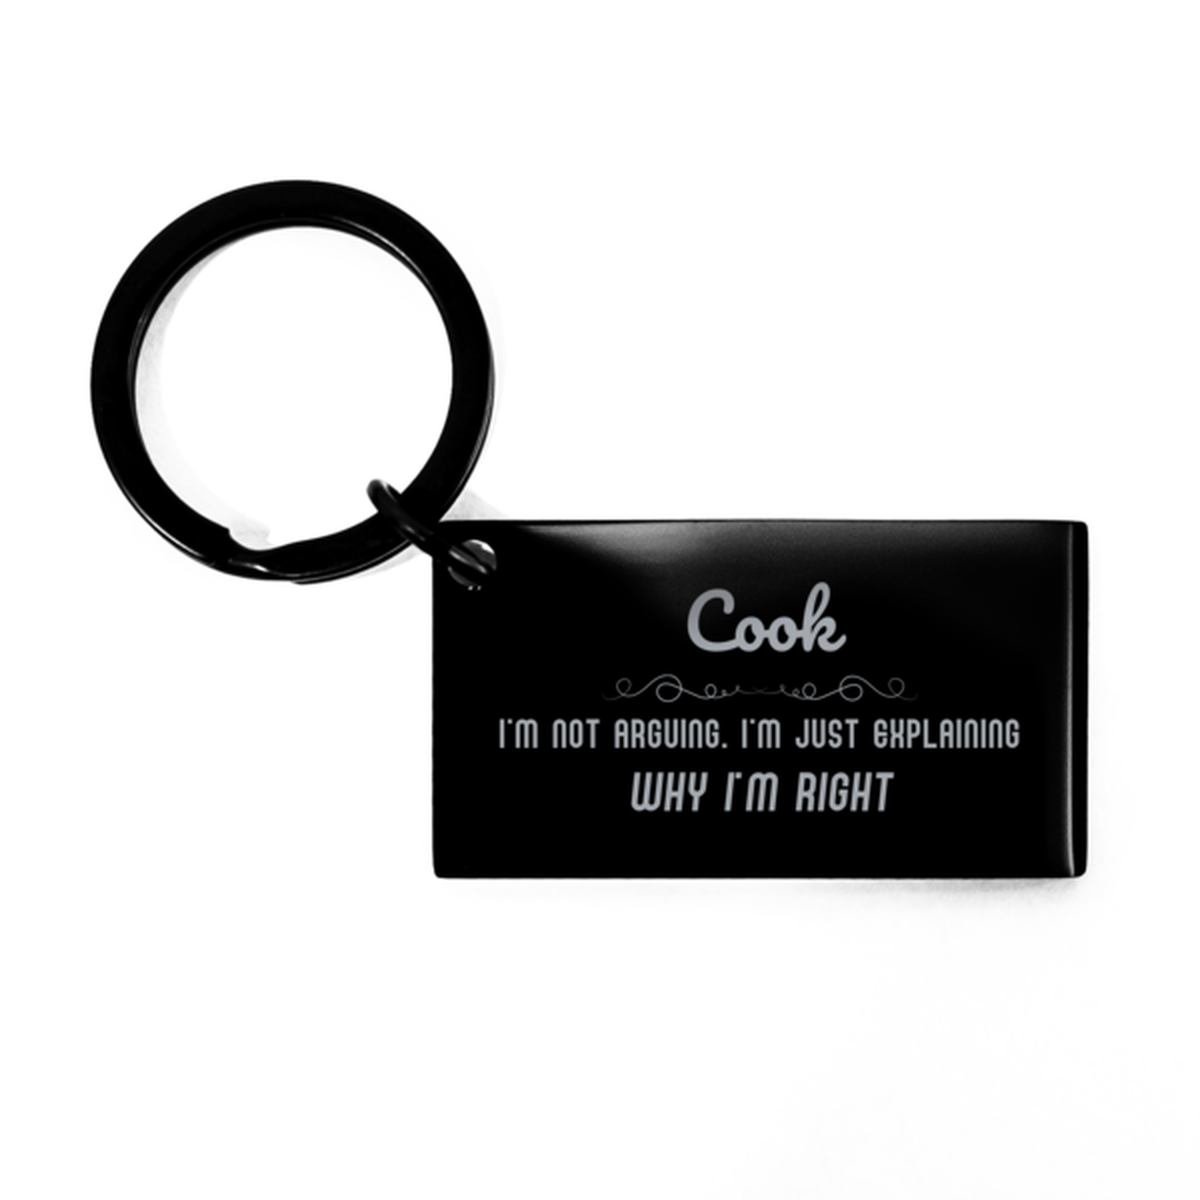 Cook I'm not Arguing. I'm Just Explaining Why I'm RIGHT Keychain, Funny Saying Quote Cook Gifts For Cook Graduation Birthday Christmas Gifts for Men Women Coworker